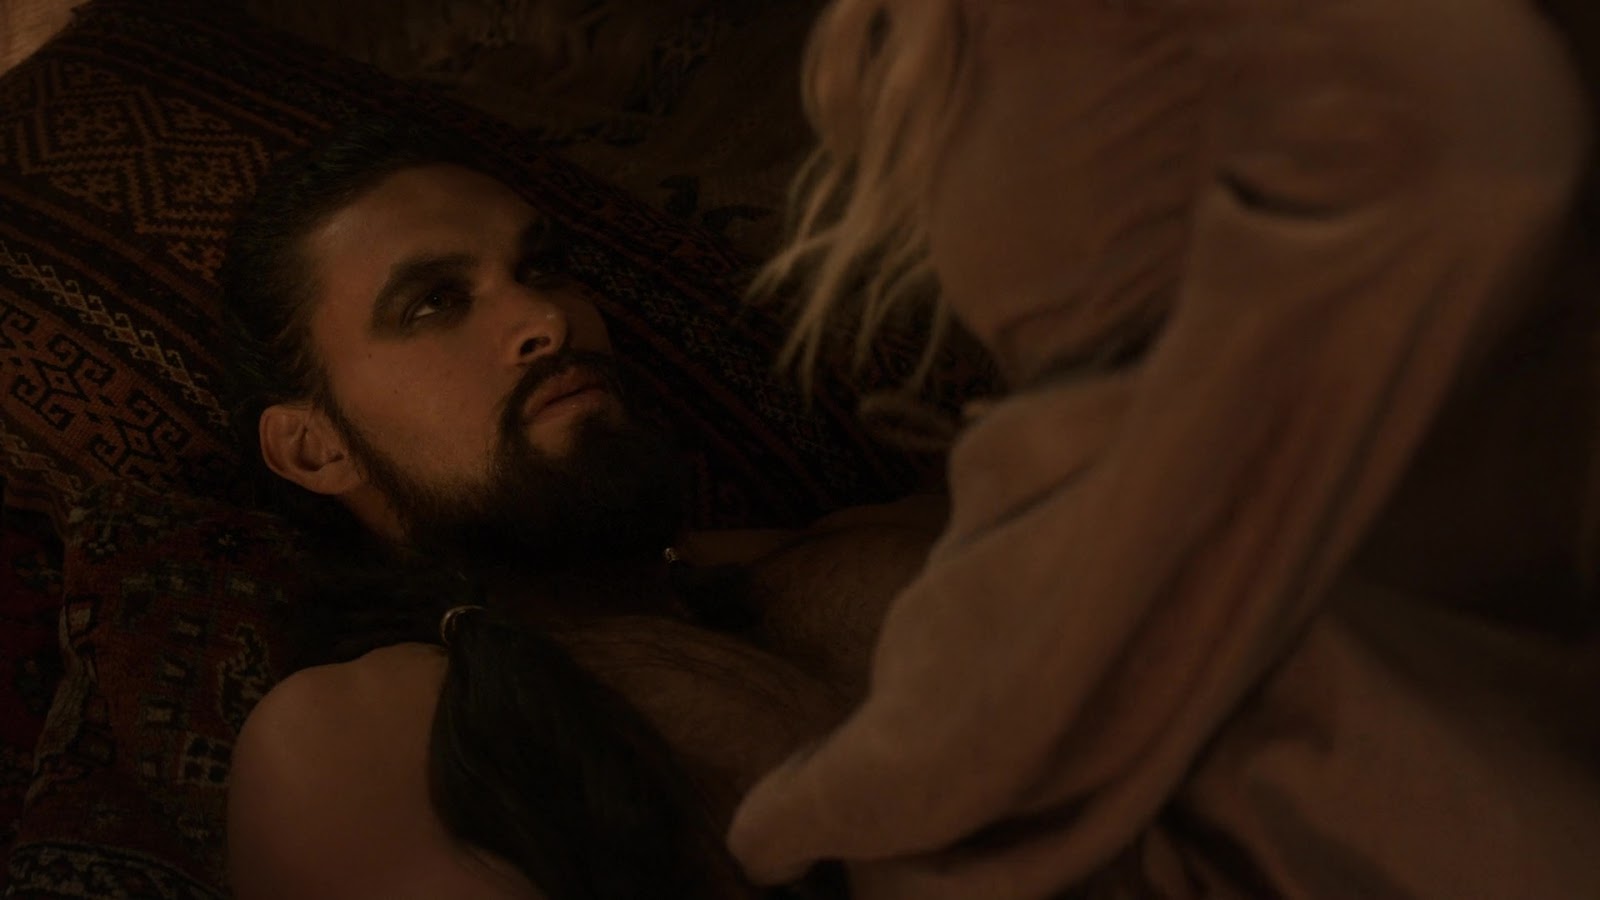 Jason Momoa nude in Game Of Thrones 1-02 "The Kingsroad" .